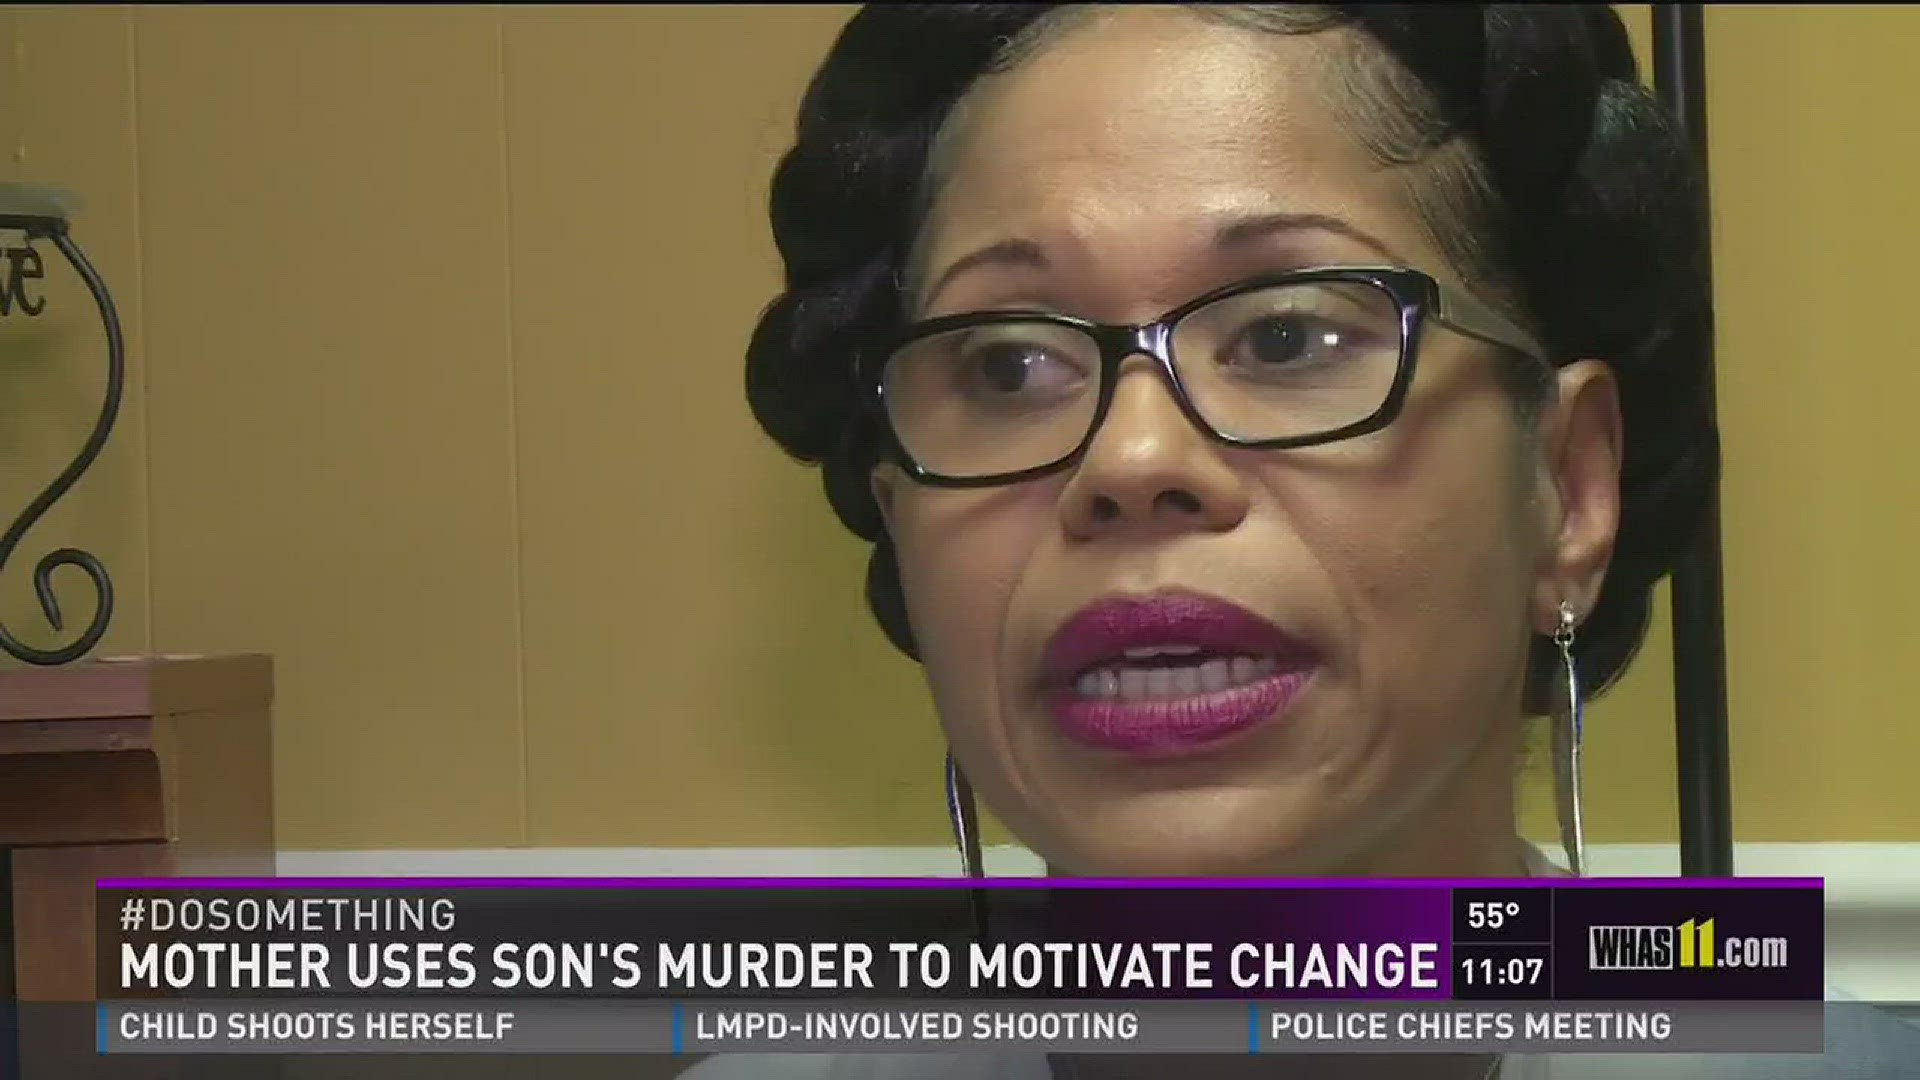 Mother uses son's murder to motivate change